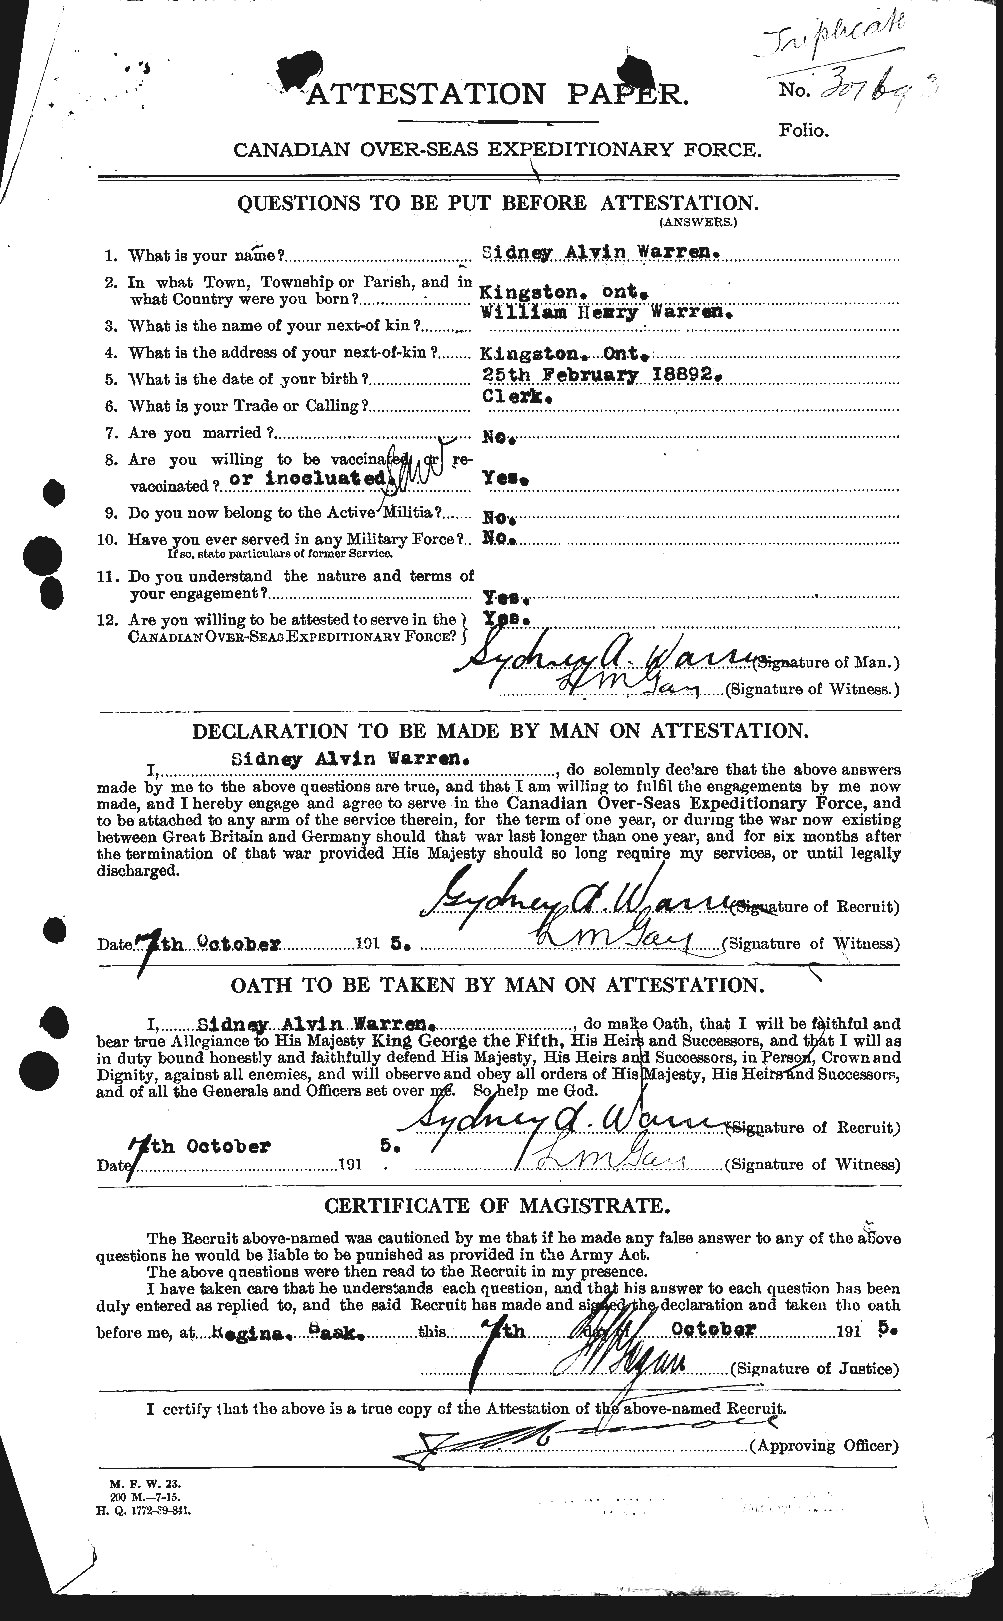 Personnel Records of the First World War - CEF 658637a